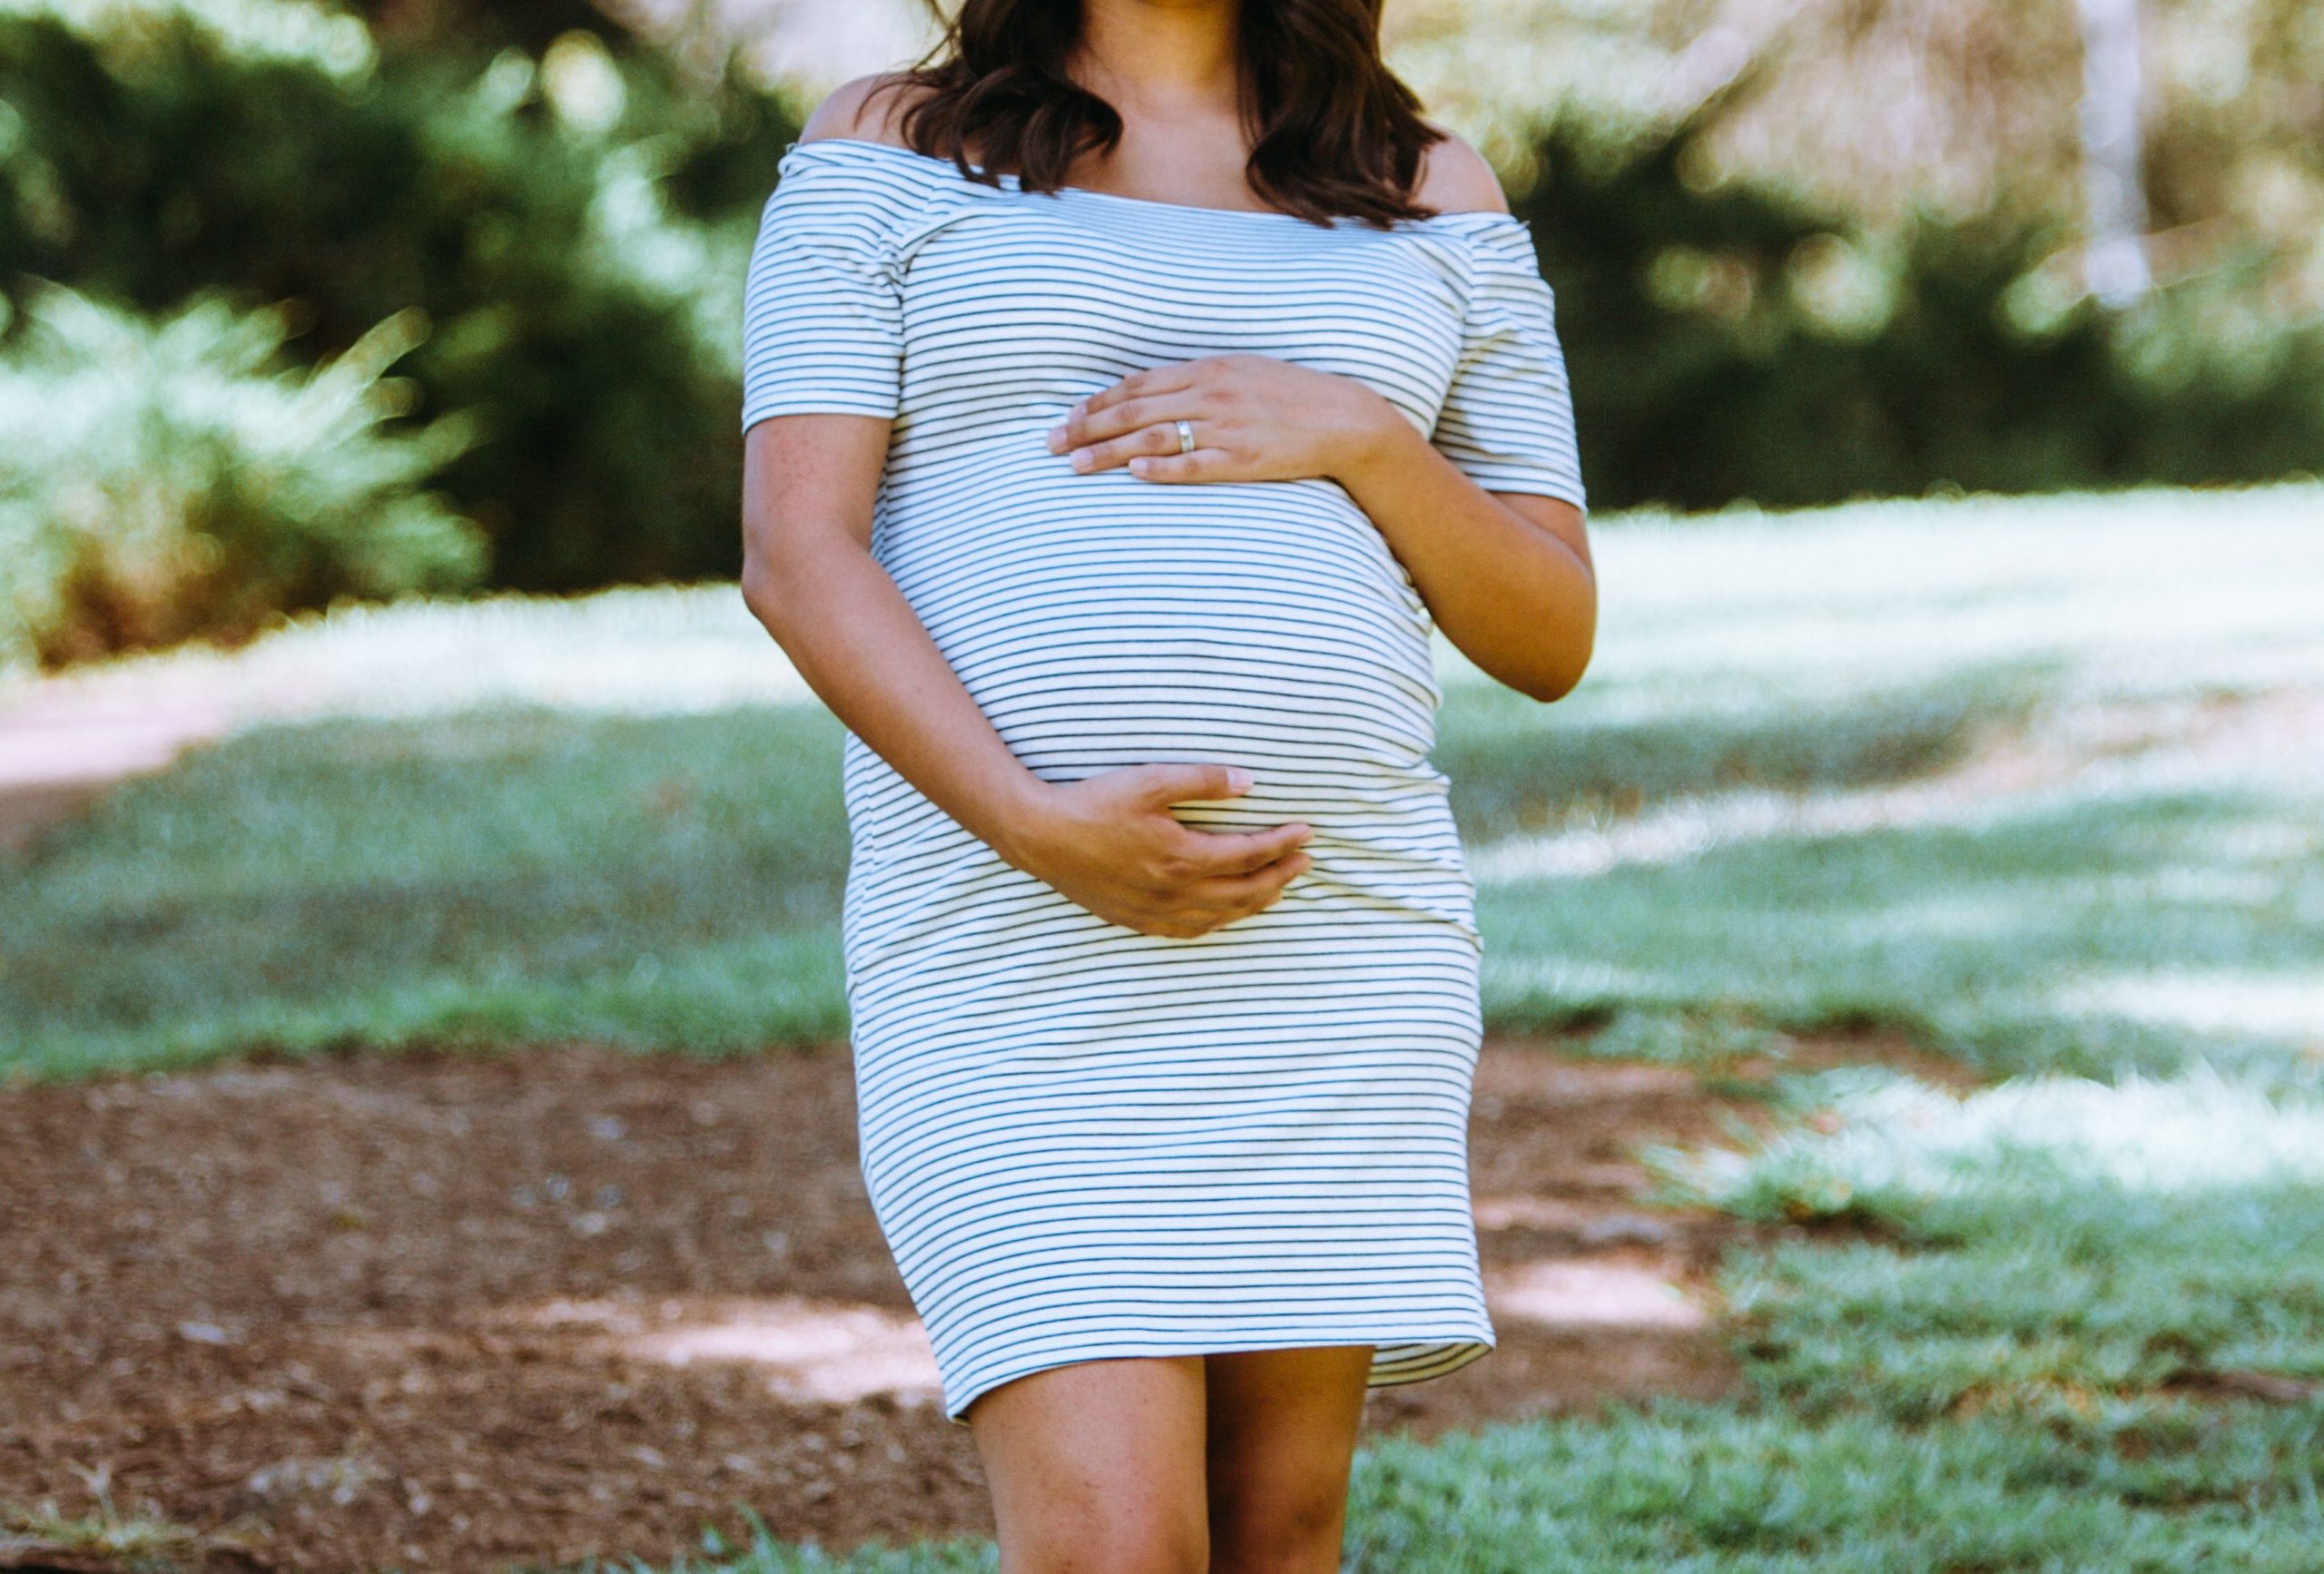 Surrogate mother in a striped dress standing in a park.